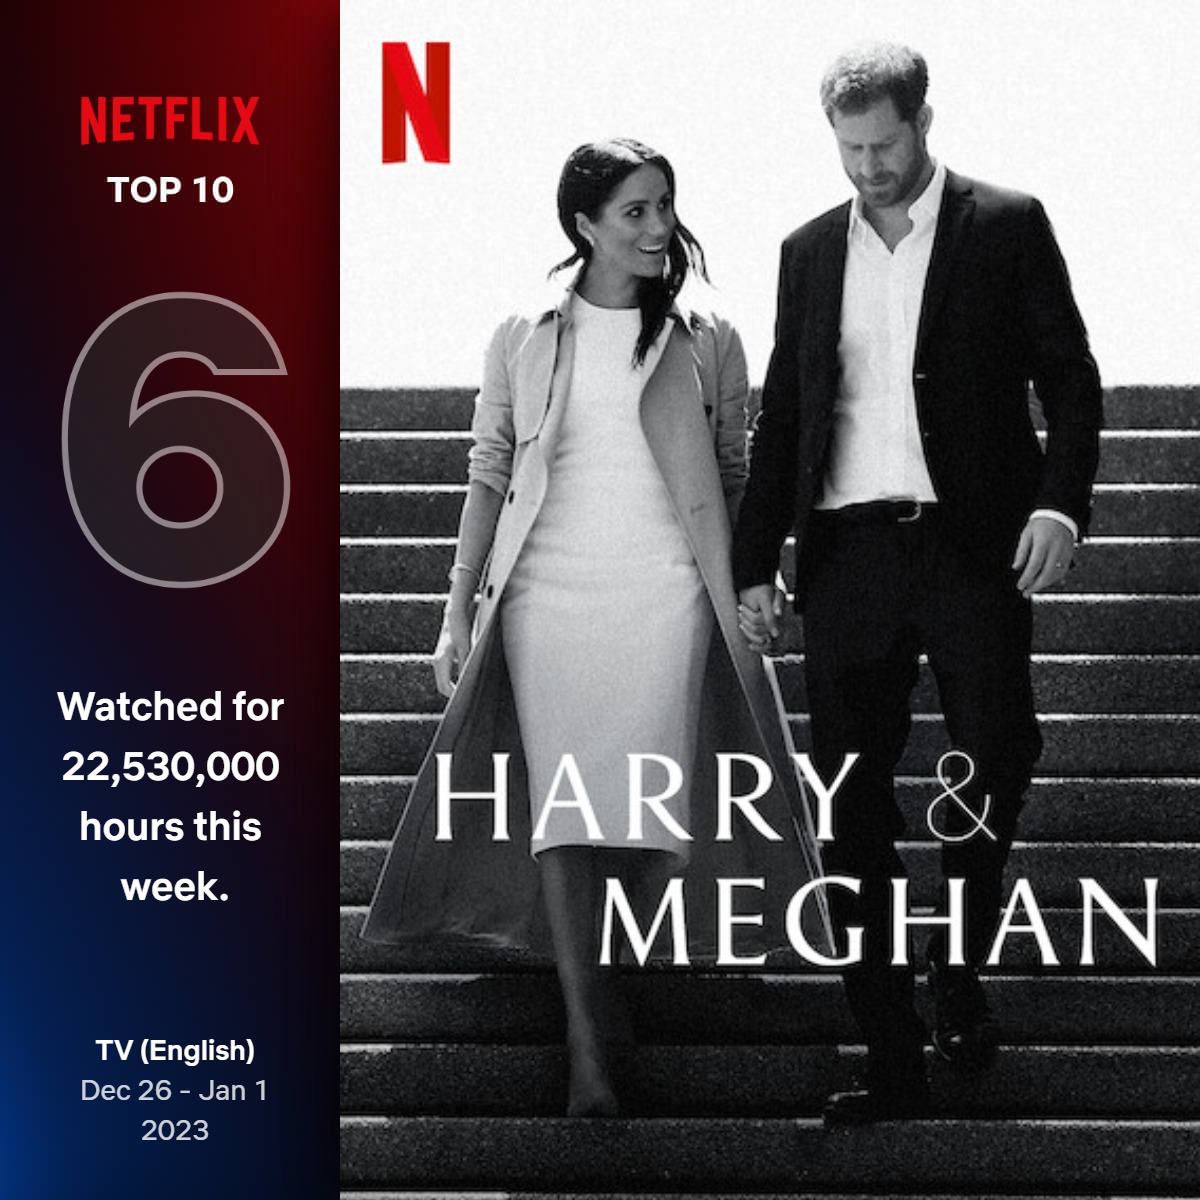 #HarryandMeghan documentary, directed by Liz Garbus, spends FOURTH CONSECUTIVE WEEK on the Netflix Global Top 10 TV Series Chart with 22.53M viewing hours between 26/12 - 01/01, taking its tally to 241.53M viewing hours.
#HarryAndMeghanNetfix #MeghanMarkle #PrinceHarry